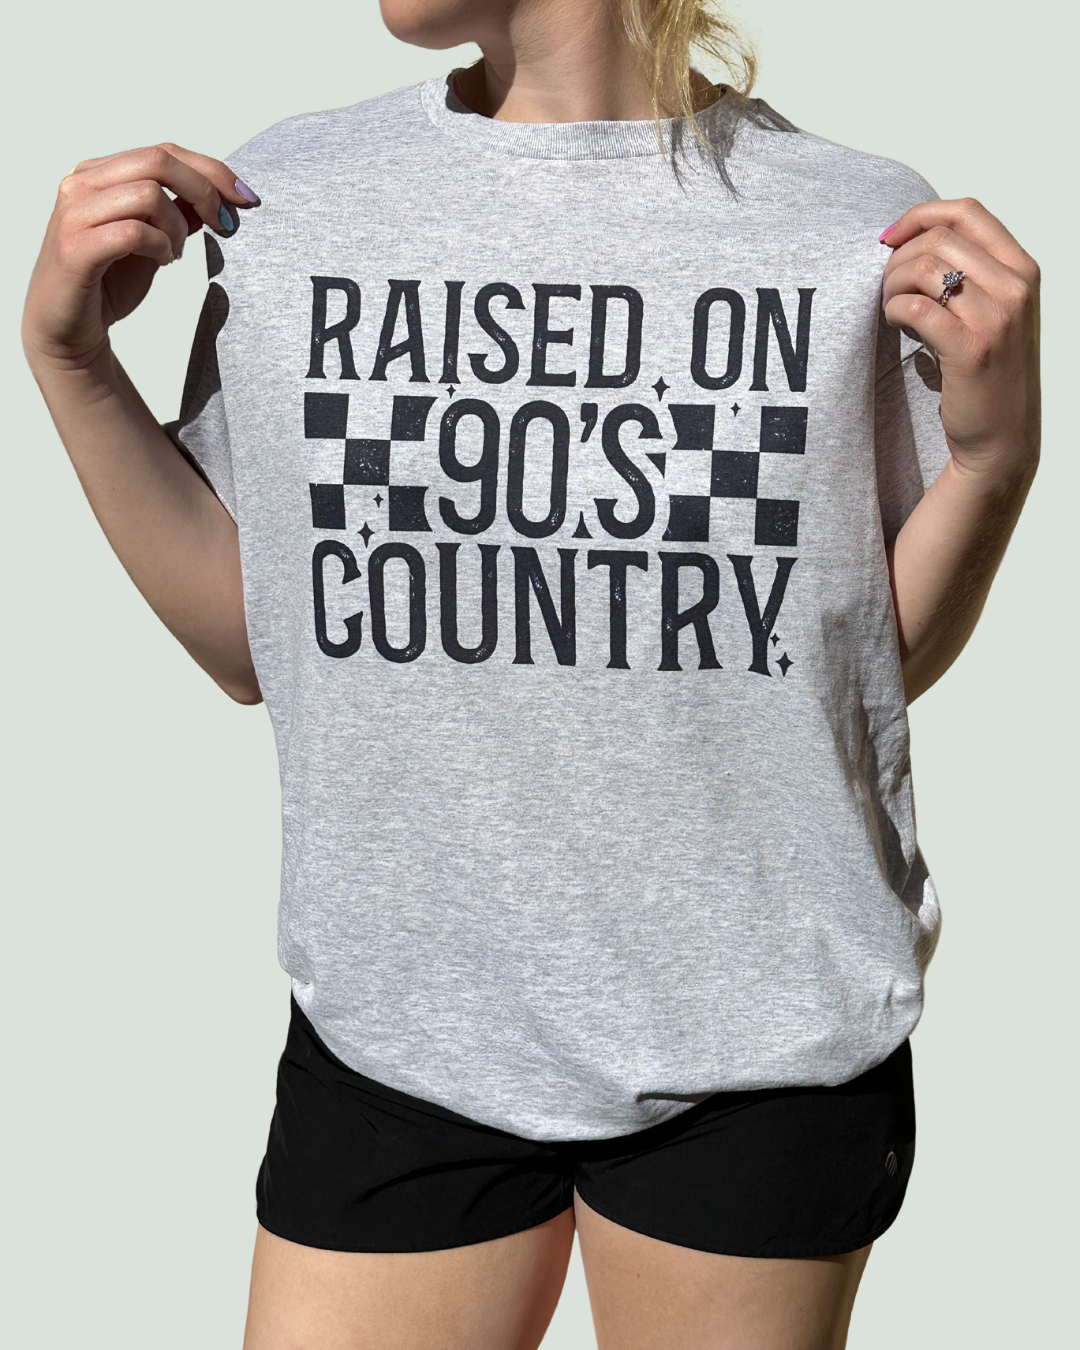 90s Country Graphic Tee